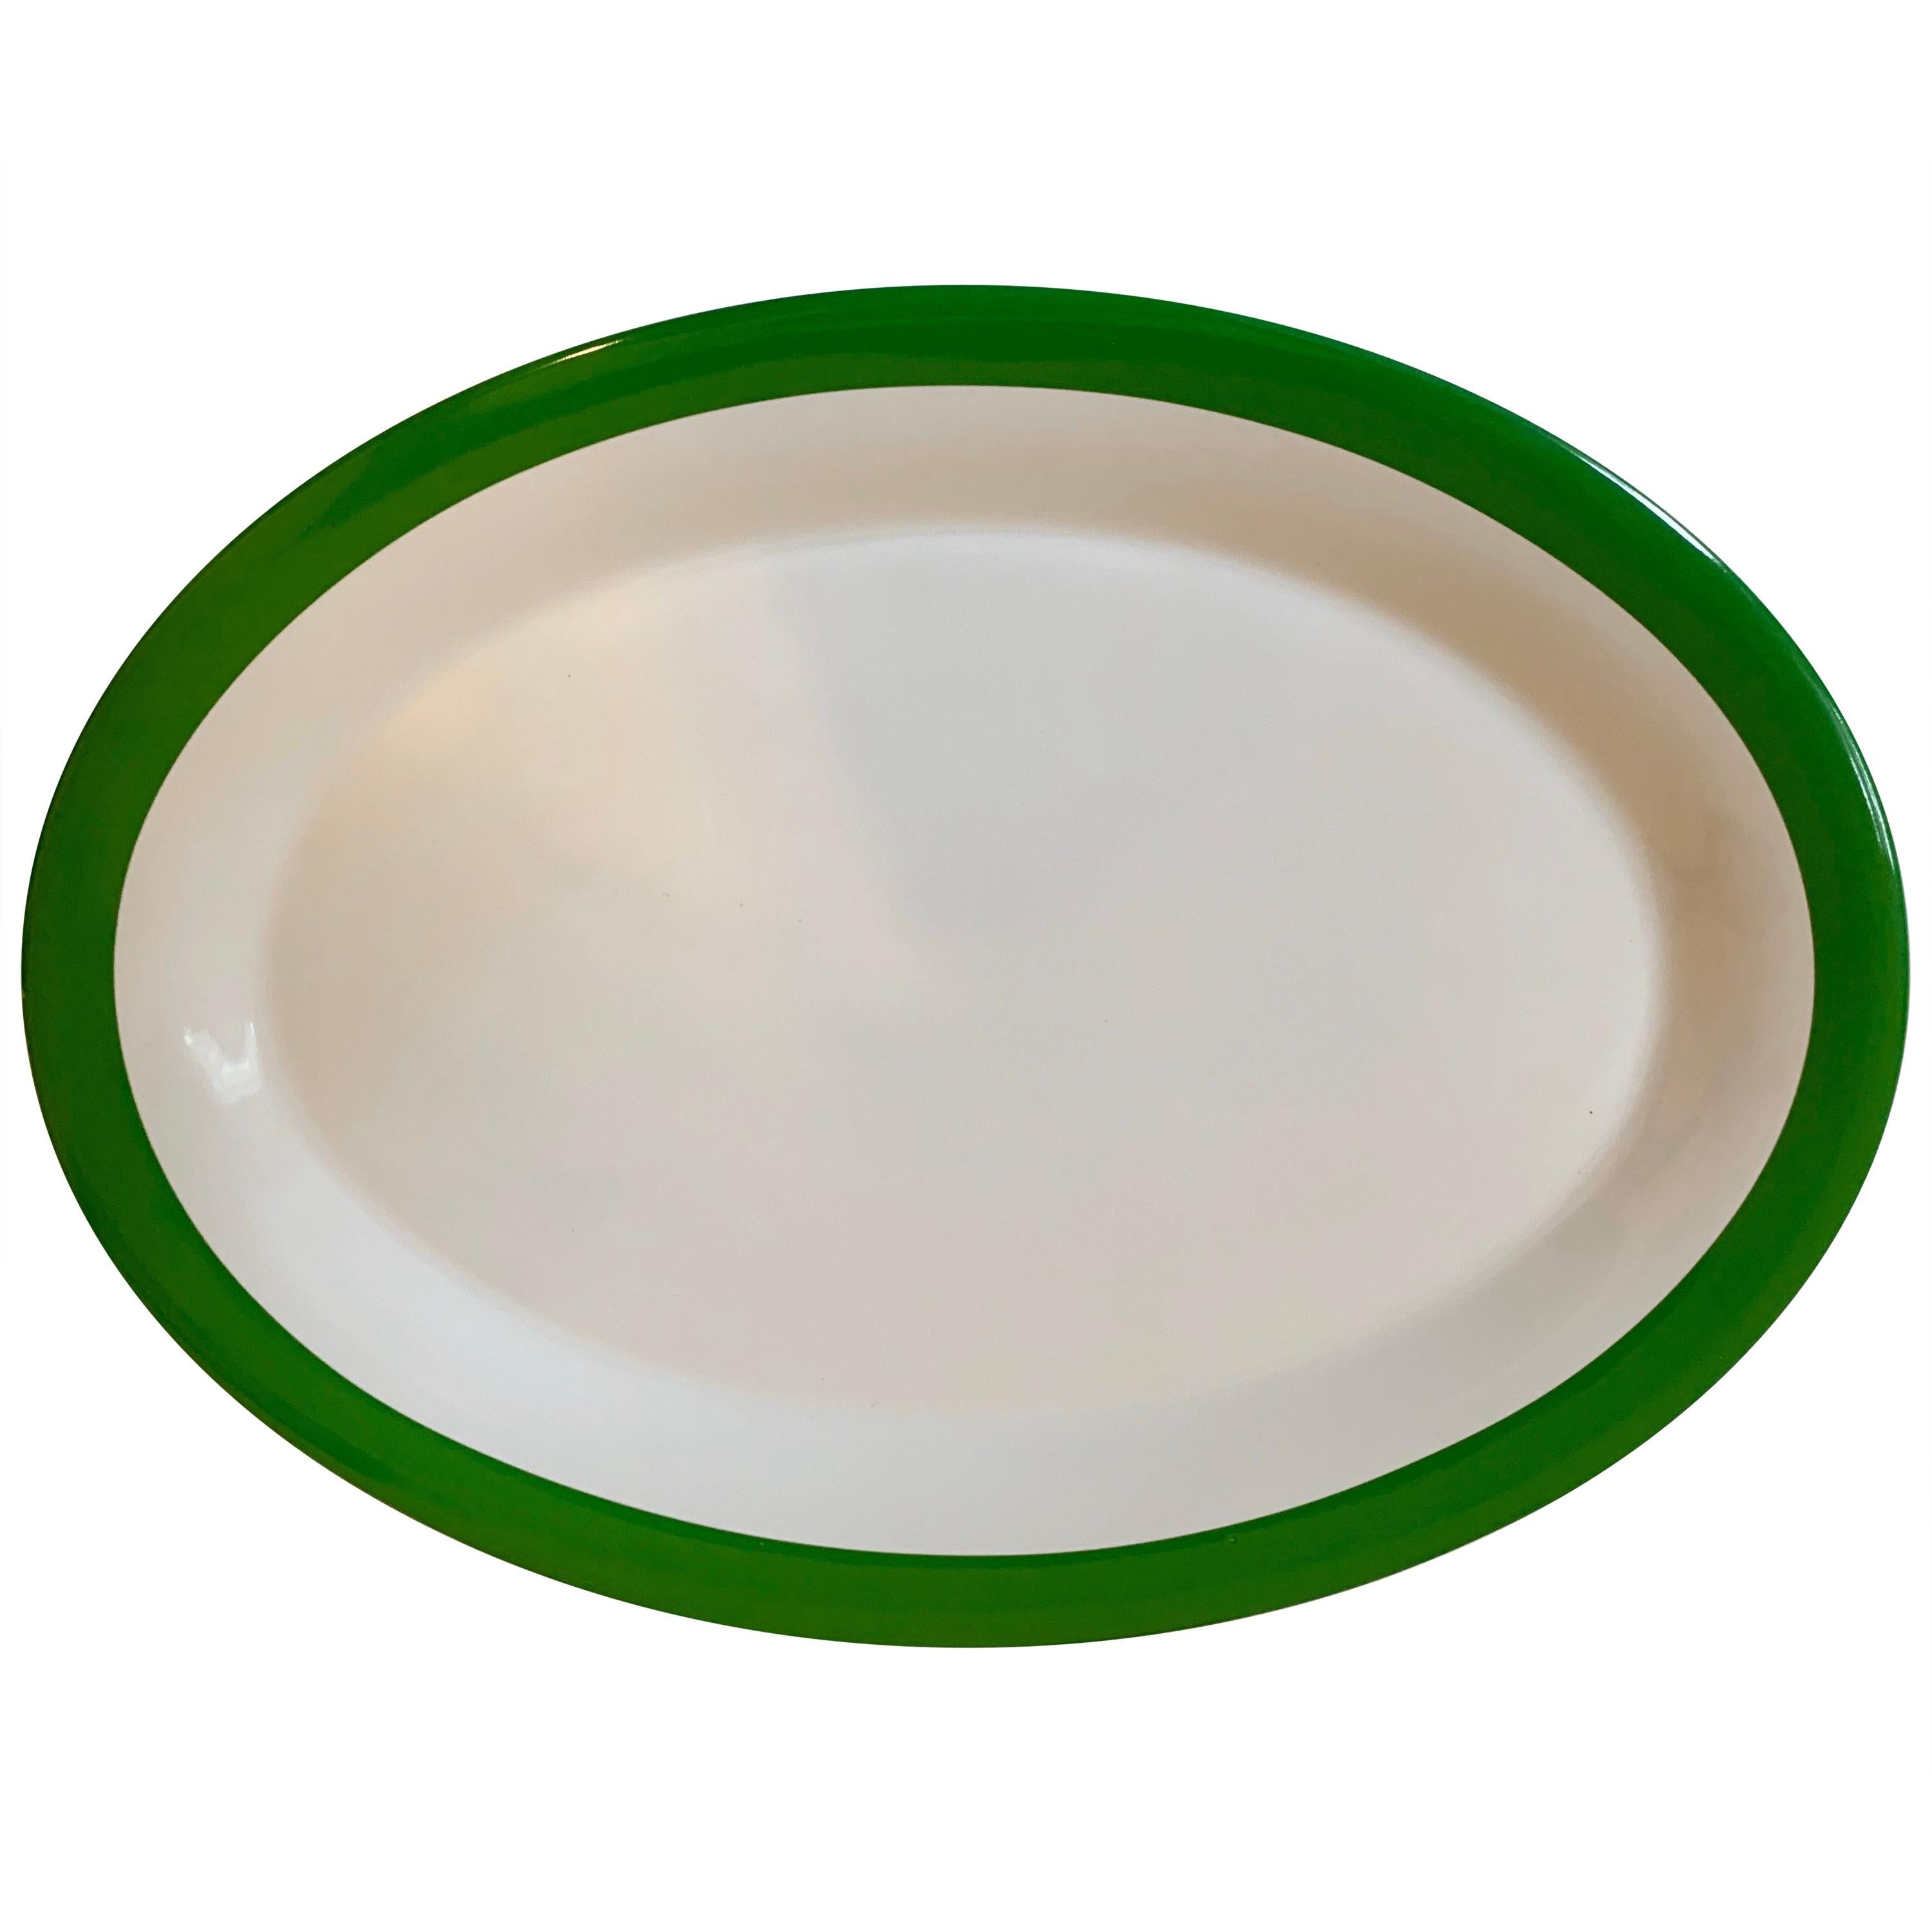 Kate Spade New York Lenox Rutherford Circle Green Oval Serving Platter